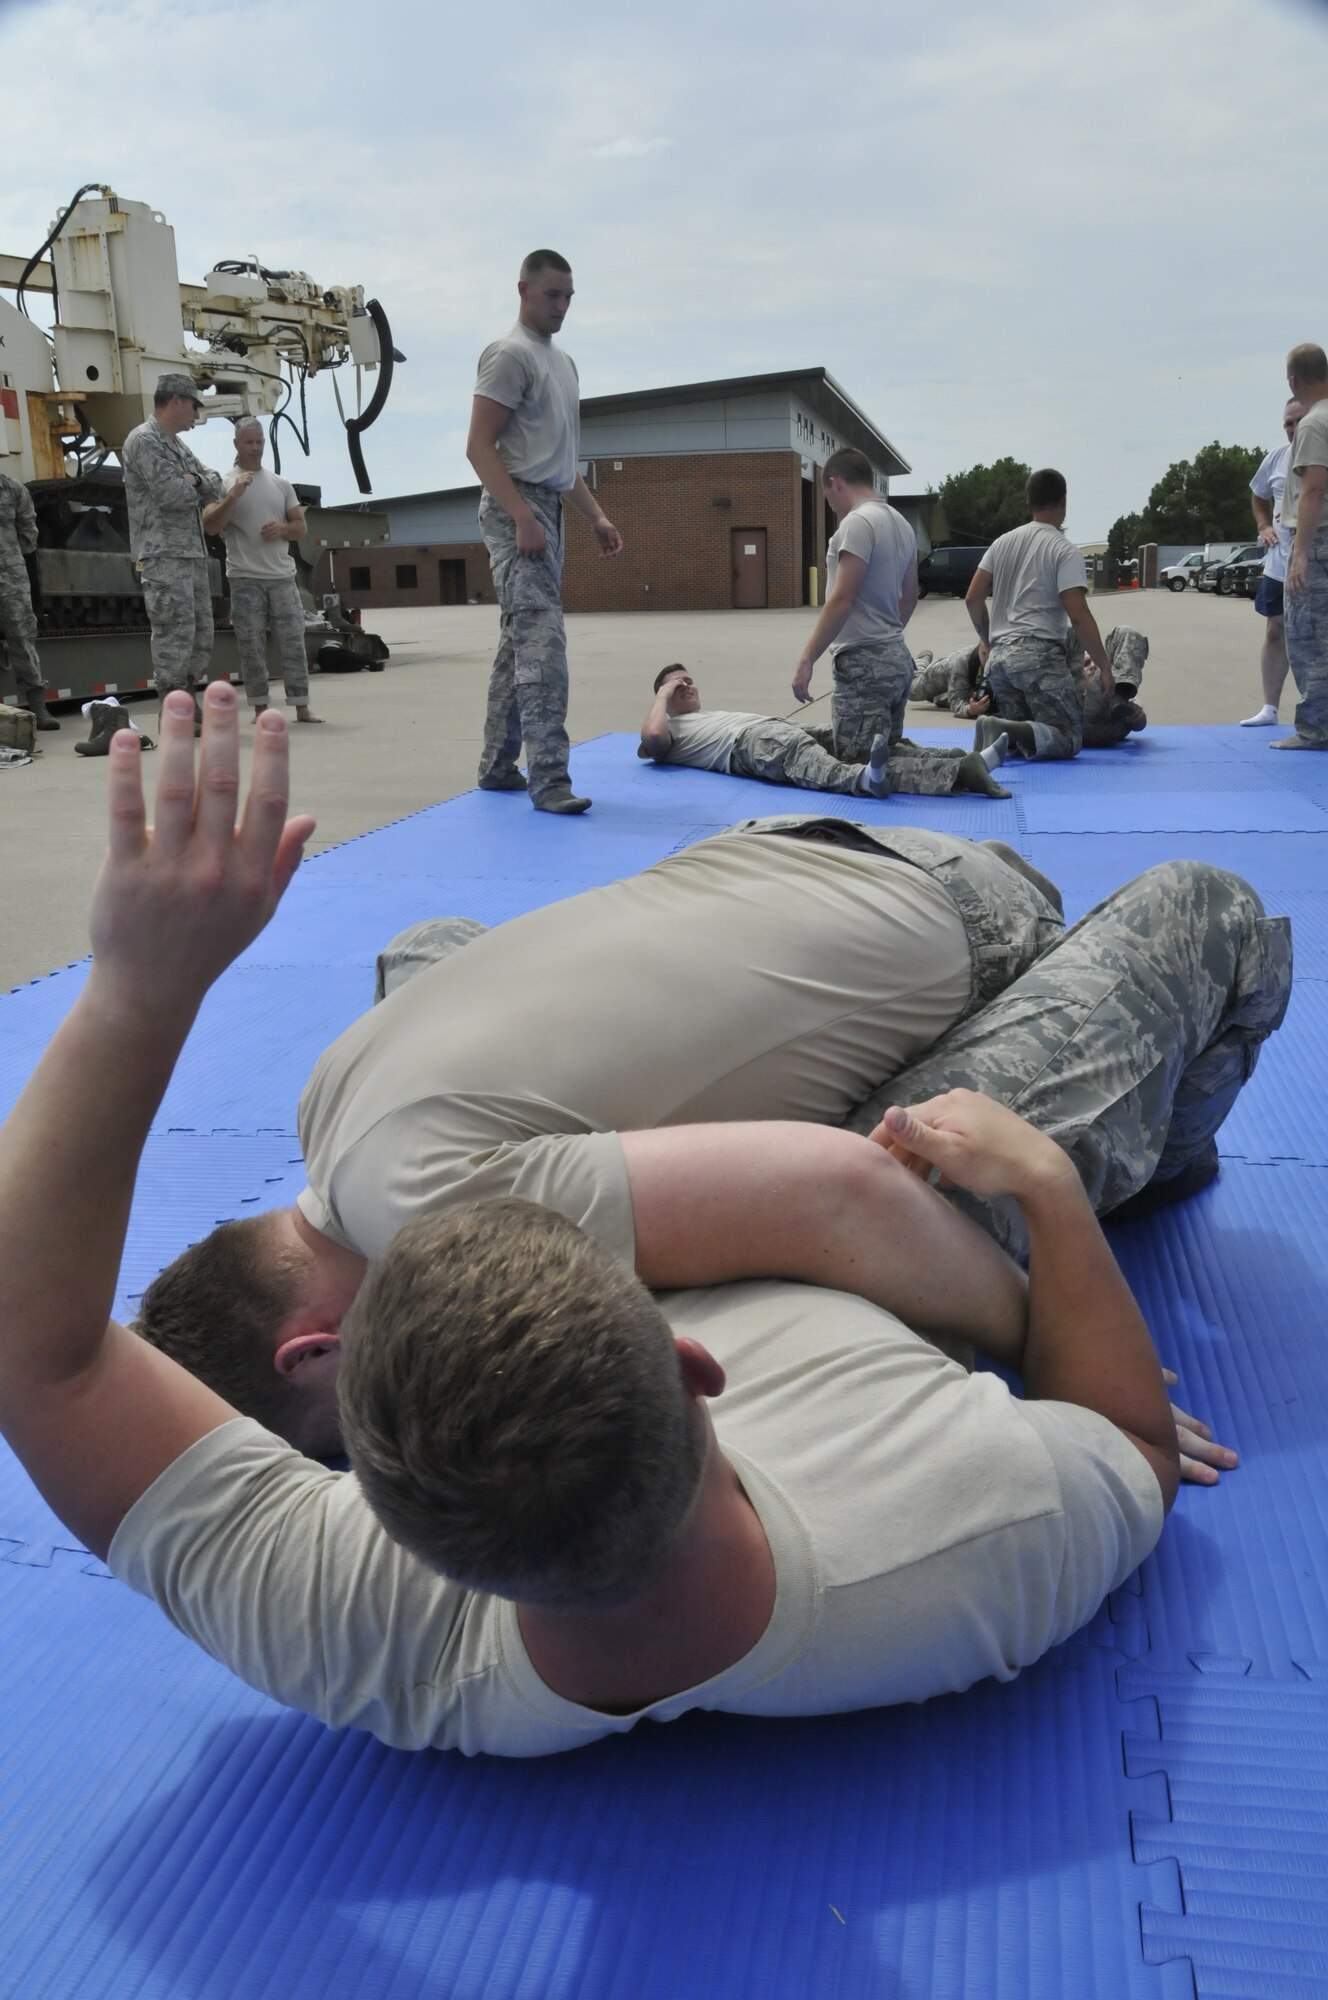 Members of the 188th Security Forces Squadron perform various combative moves in a training event held at Ebbing Air National Guard Base, Fort Smith, Arkansas Sept. 6, 2014. The event, held during a unit training assembly, strengthened the squadron’s mission readiness. (U.S. Air National Guard photo by Staff Sgt. John Suleski/Released)